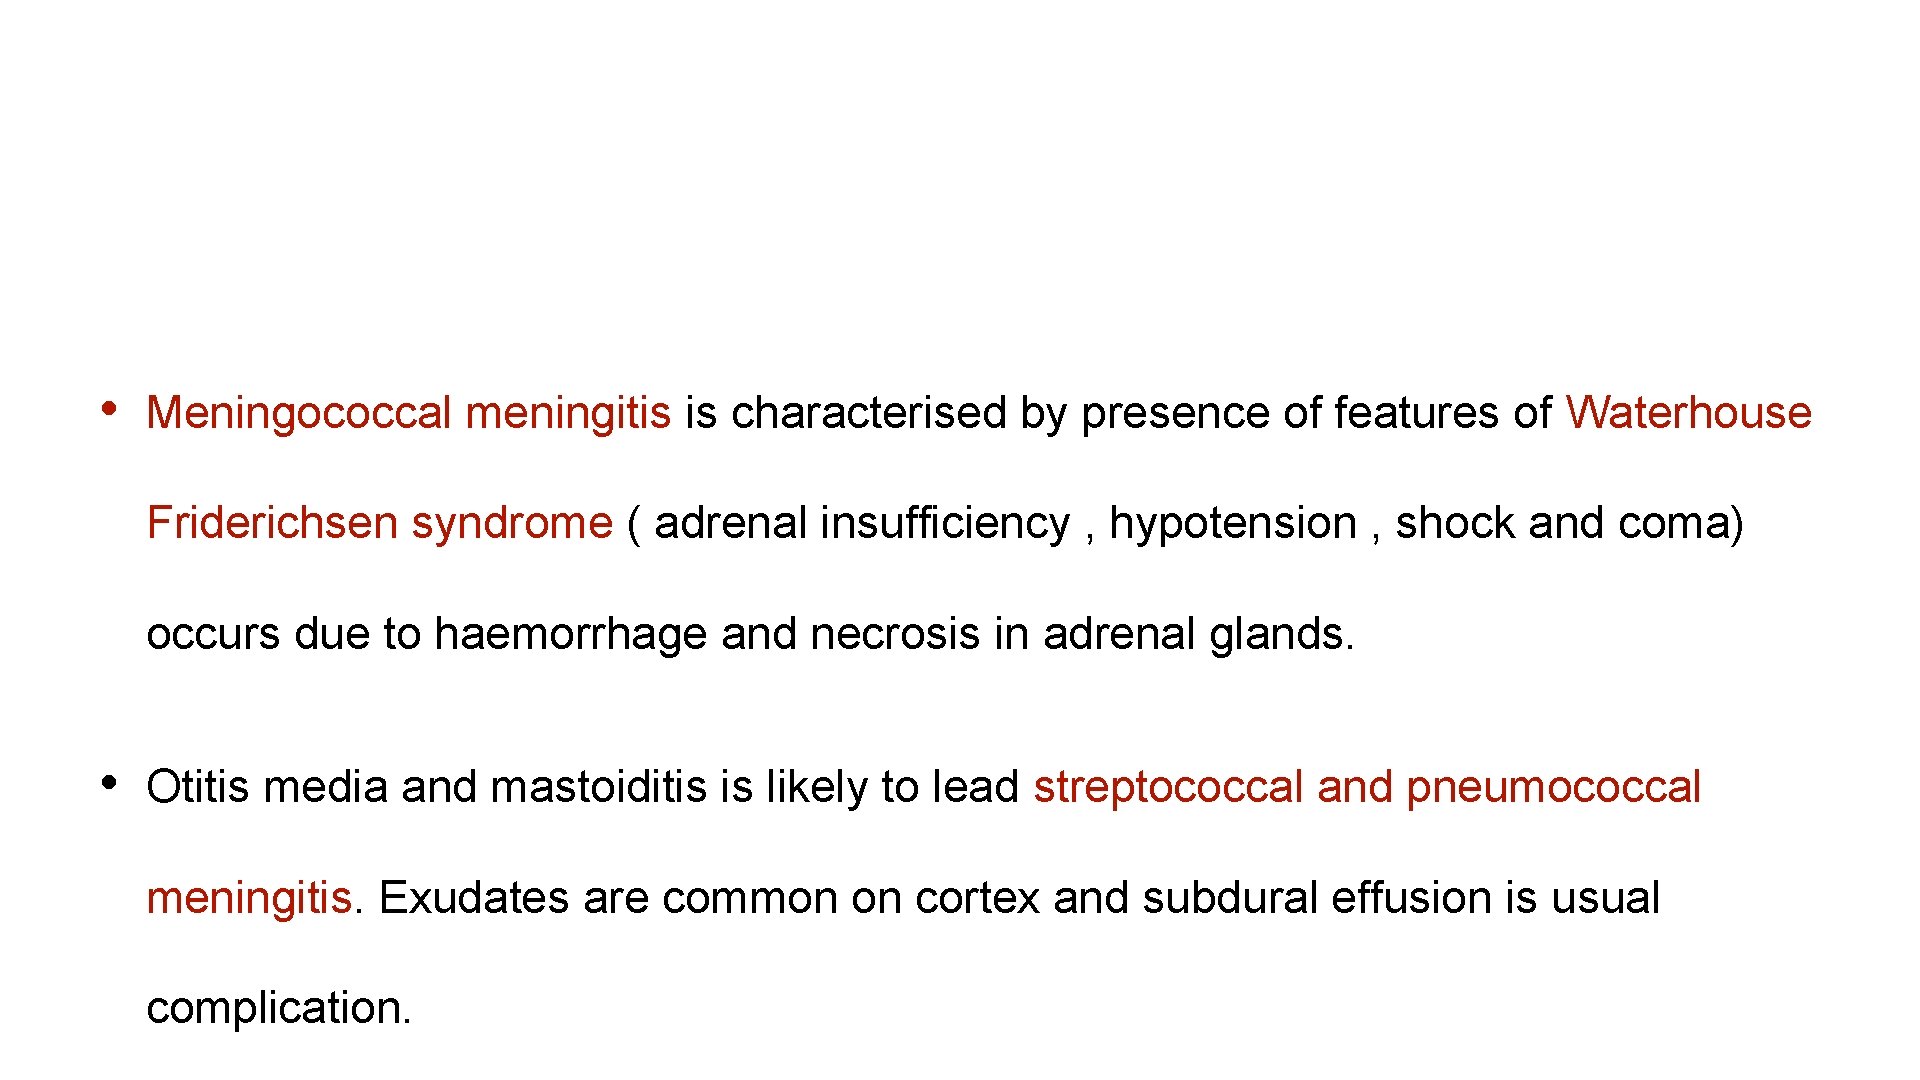  • Meningococcal meningitis is characterised by presence of features of Waterhouse Friderichsen syndrome